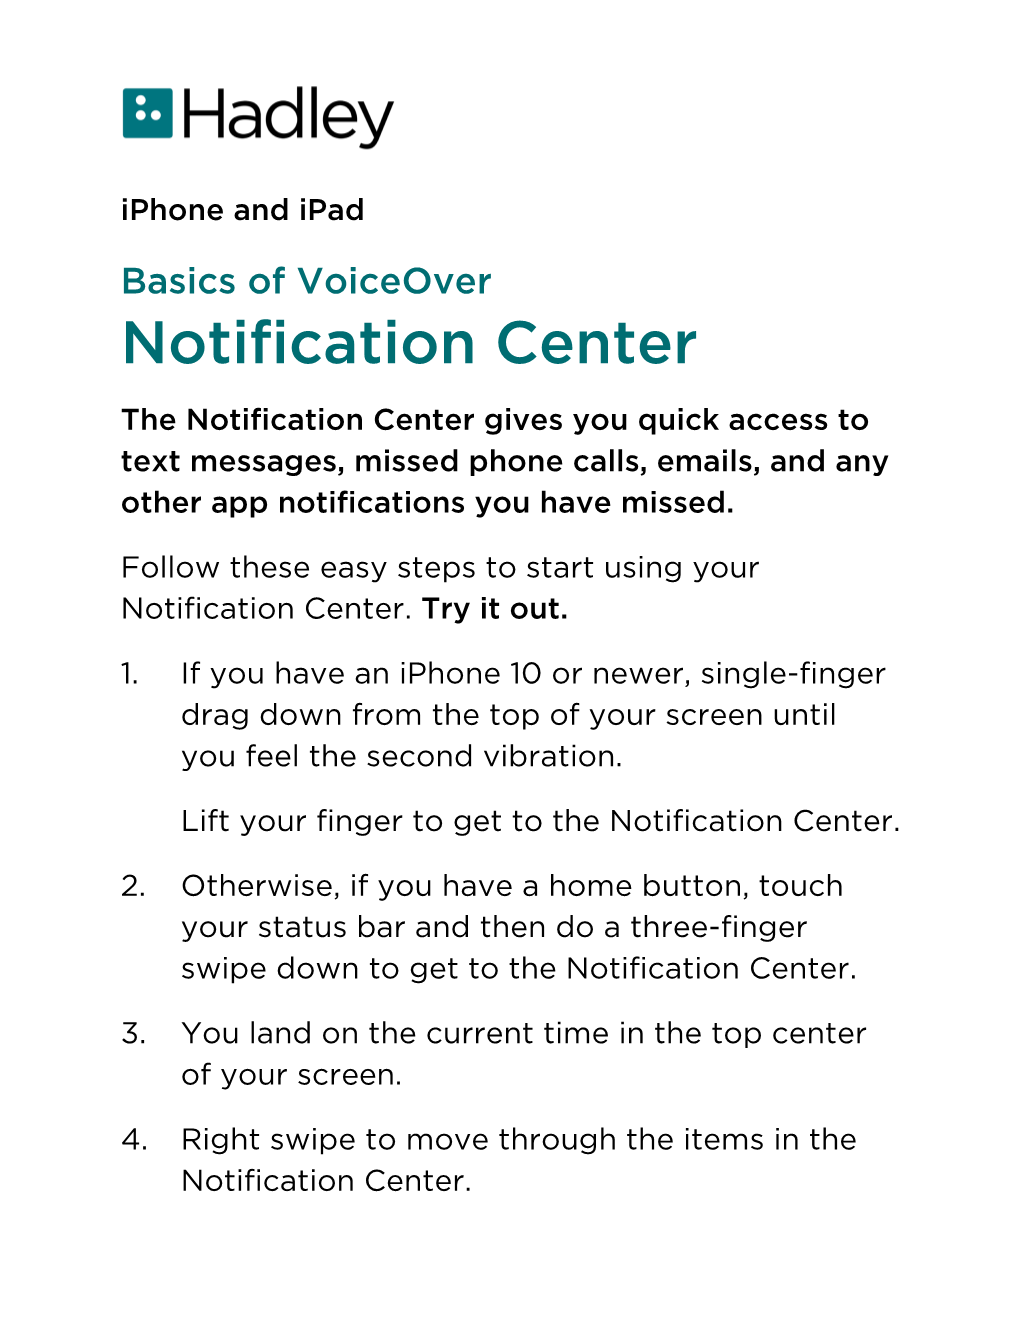 Notification Center the Notification Center Gives You Quick Access to Text Messages, Missed Phone Calls, Emails, and Any Other App Notifications You Have Missed